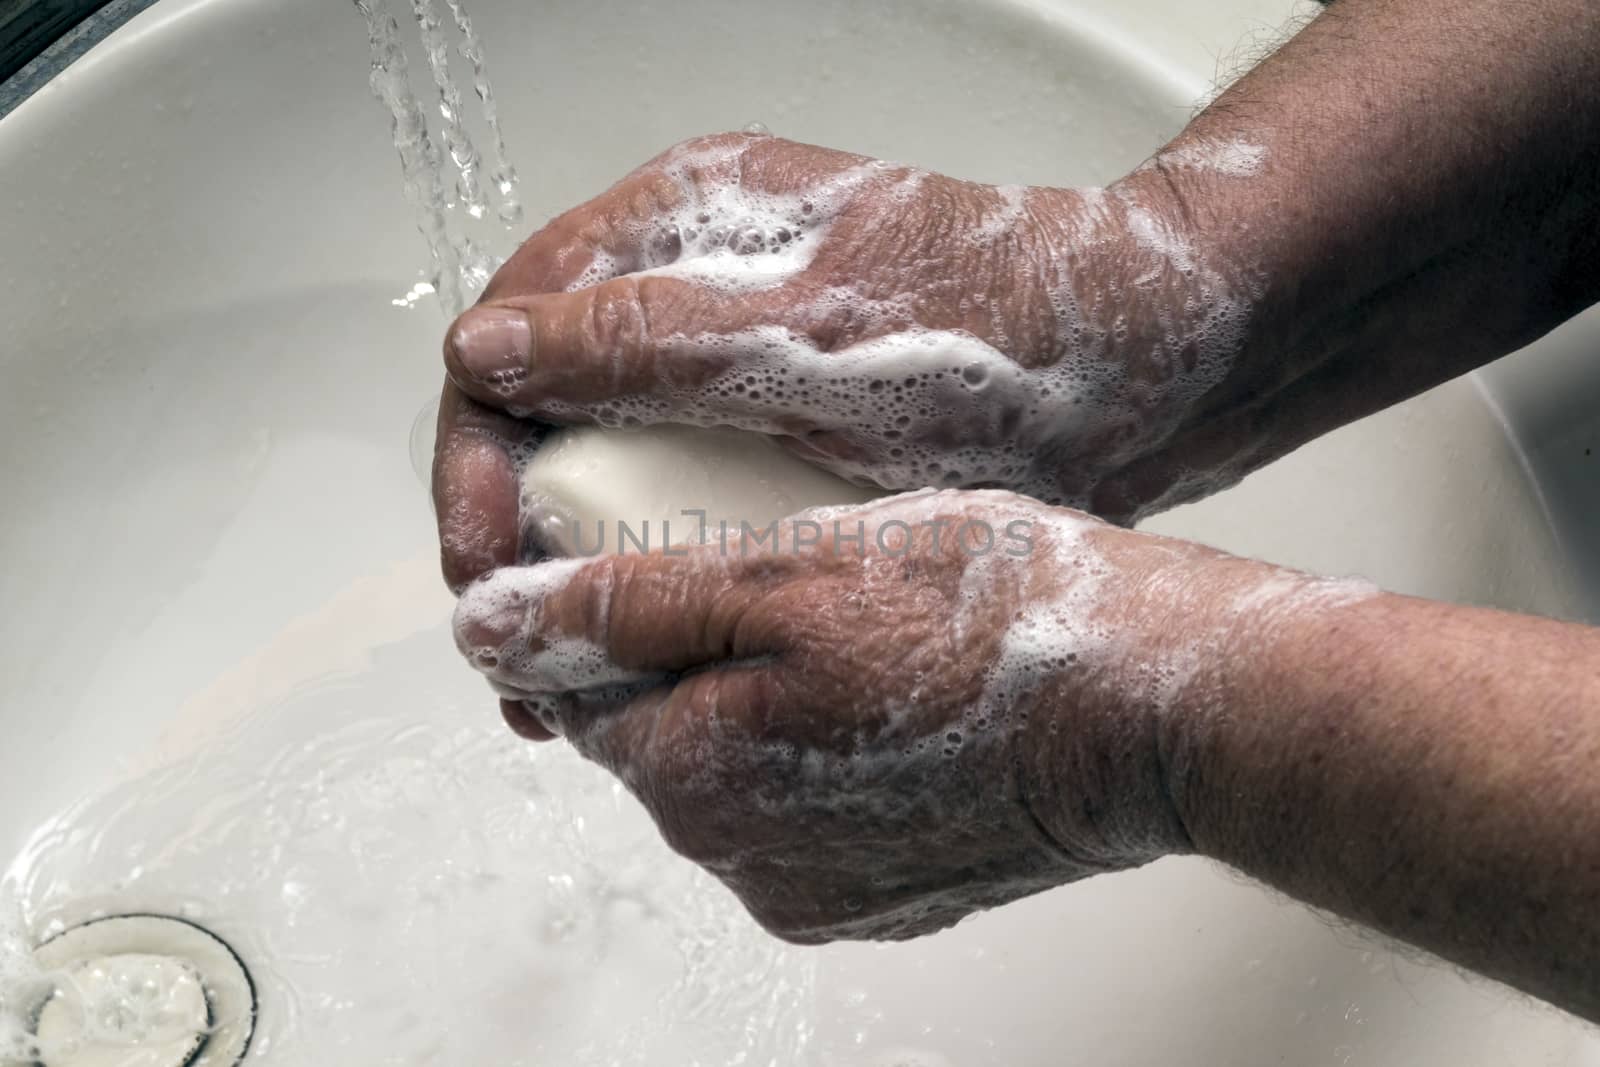 It is important to wash your hands to prevent viral infection.